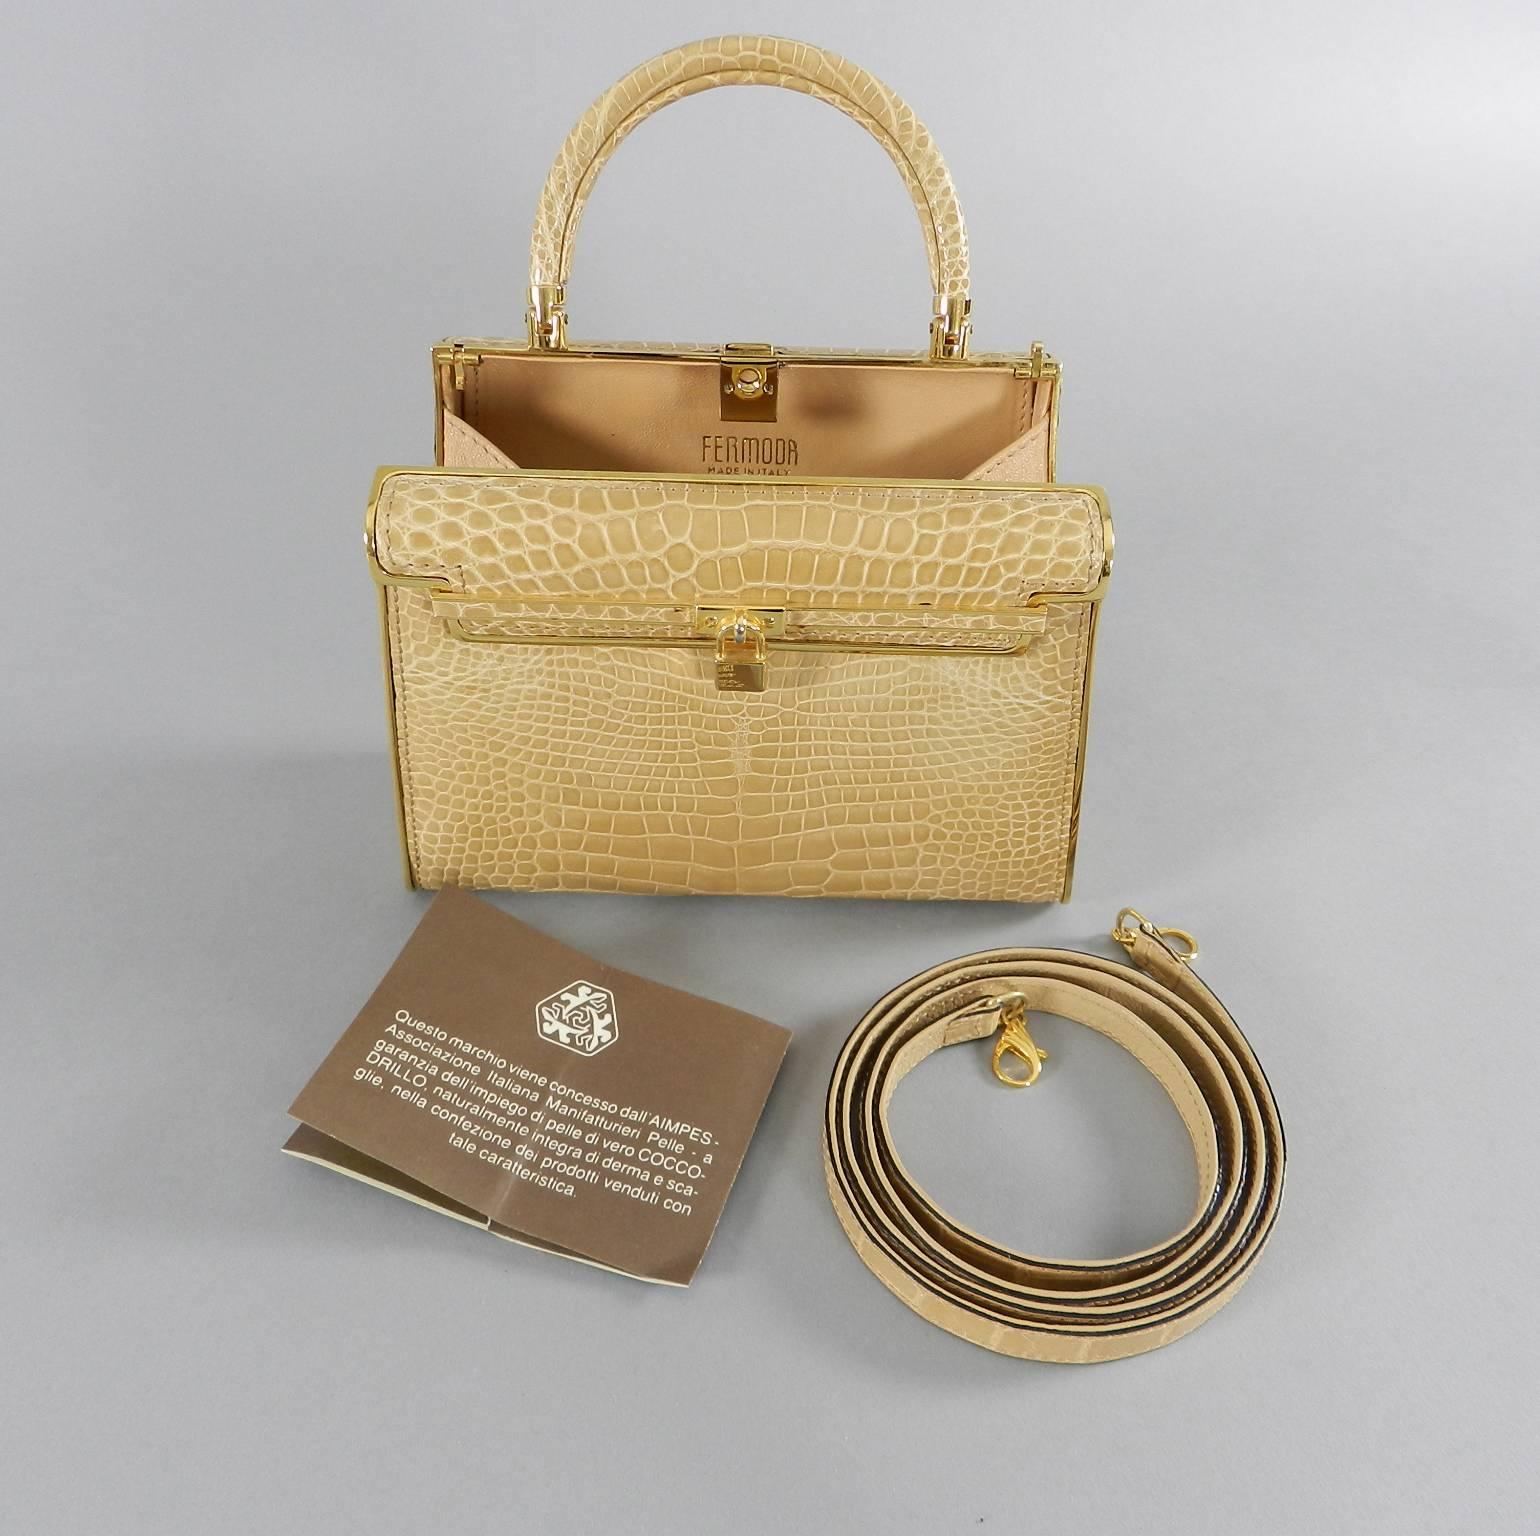 Fermoda Italy beige crocodile bag. Hard metal box bag style with shiny goldtone metal hardware. Excellent clean condition.  Shoulder strap can be tucked inside when used with top handle. Measures 7 x 5 x 2.5